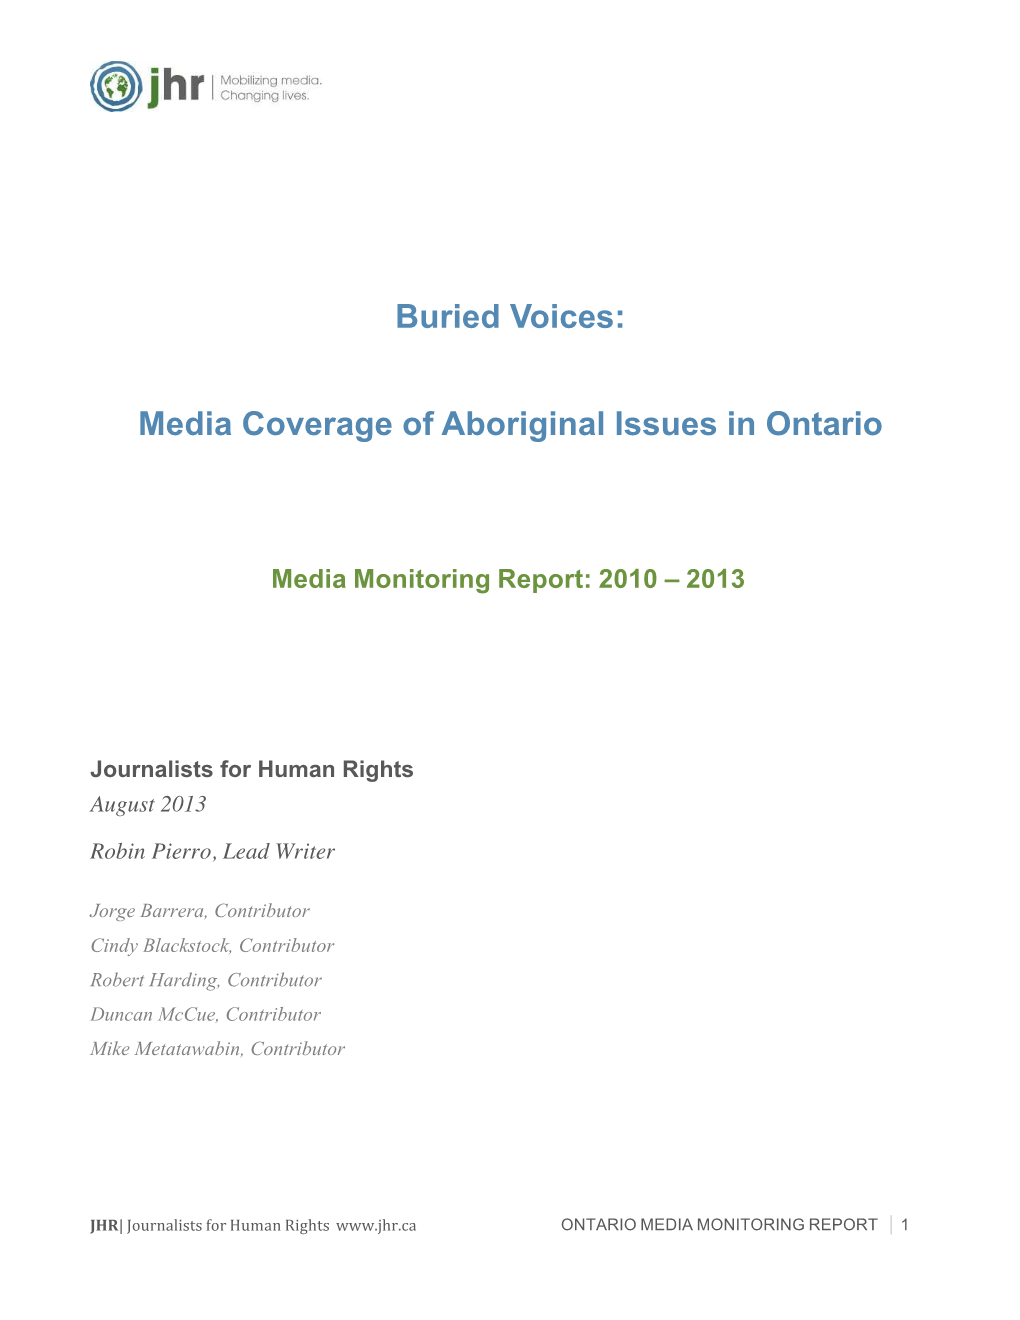 Buried Voices: Media Coverage of Aboriginal Issues in Ontario